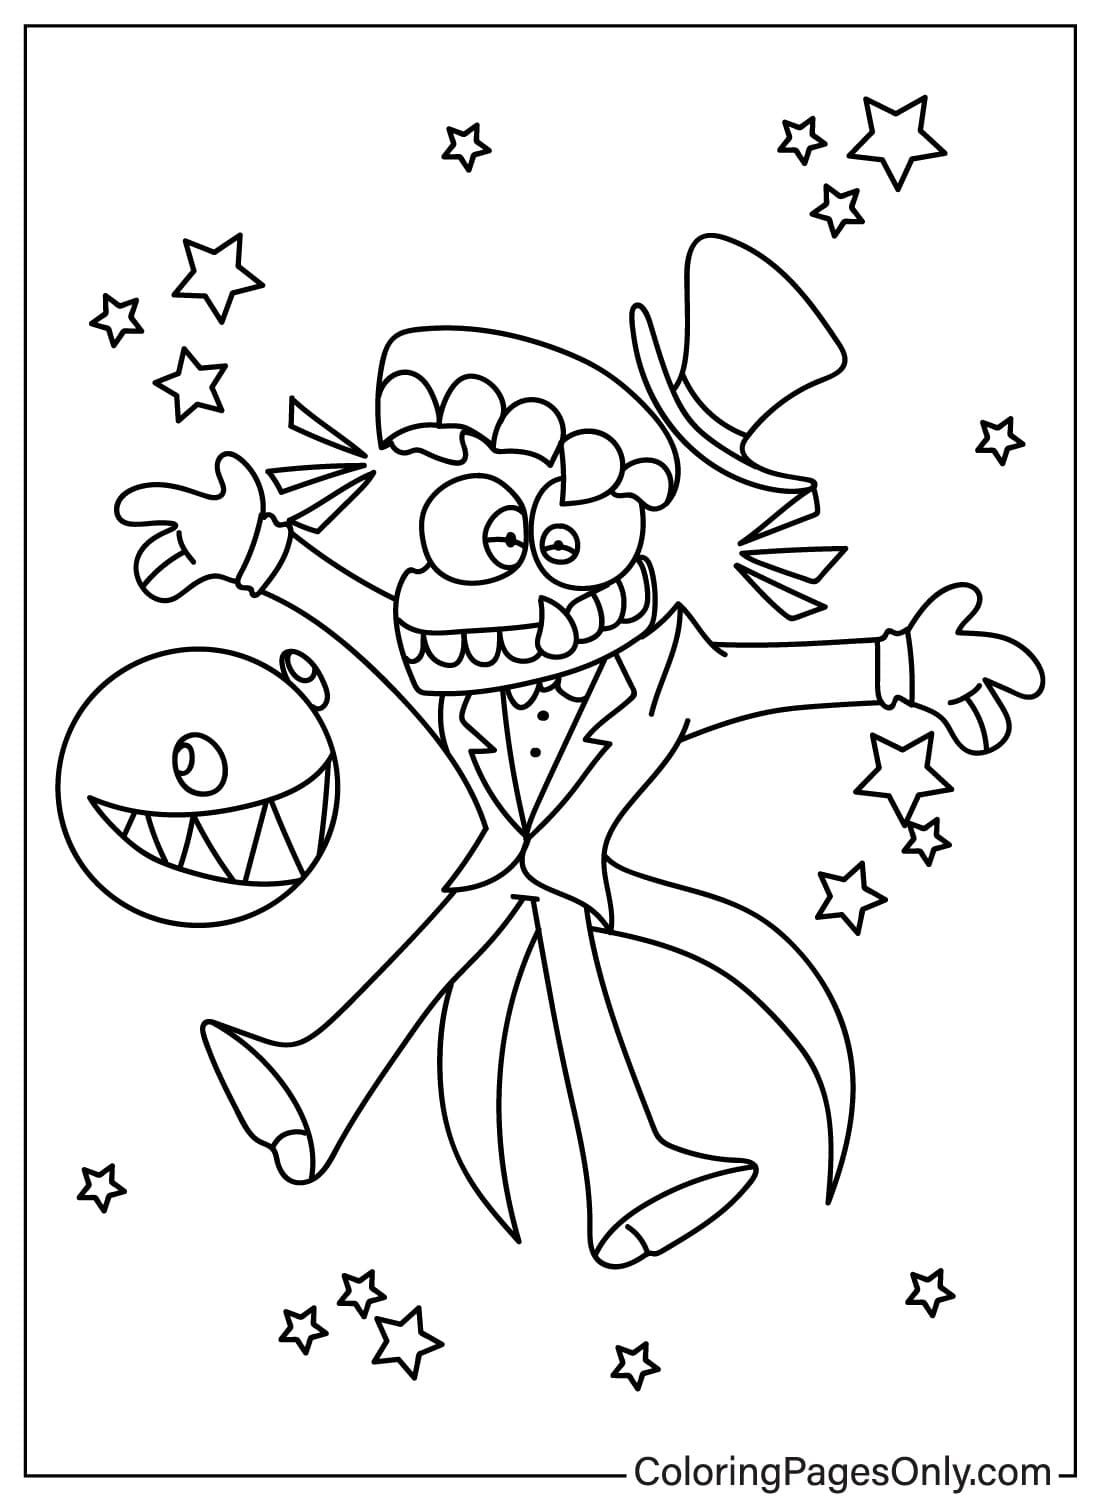 Caine Coloring Page from Caine